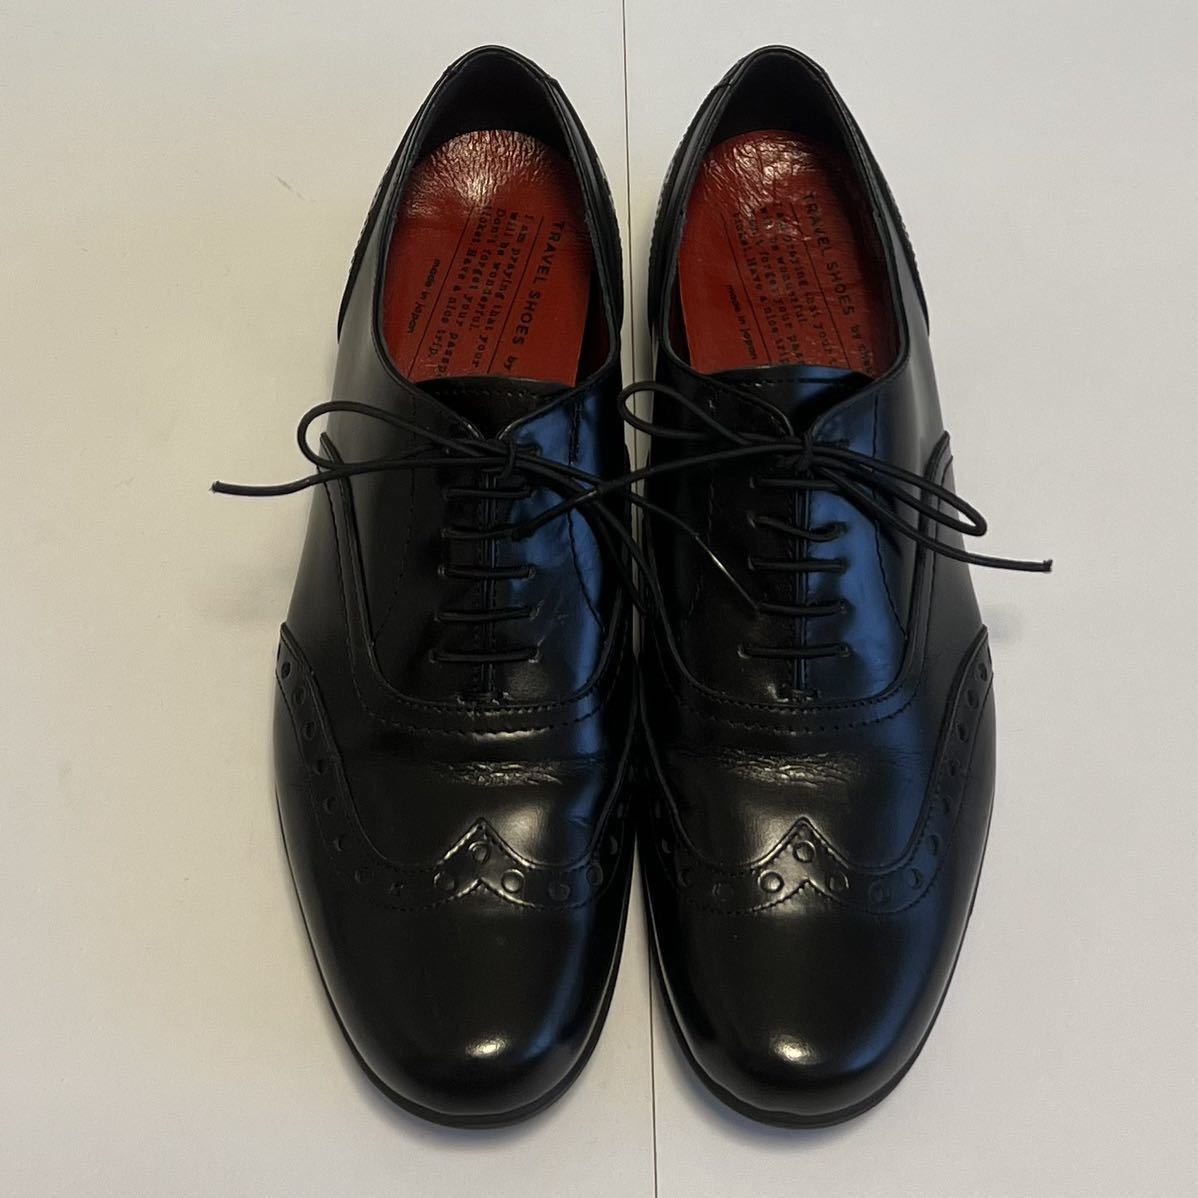  beautiful goods chaussershoseTRAVEL SHOES travel shoes wing chip original leather shoes 38 black made in Japan TR-004 leather shoes 